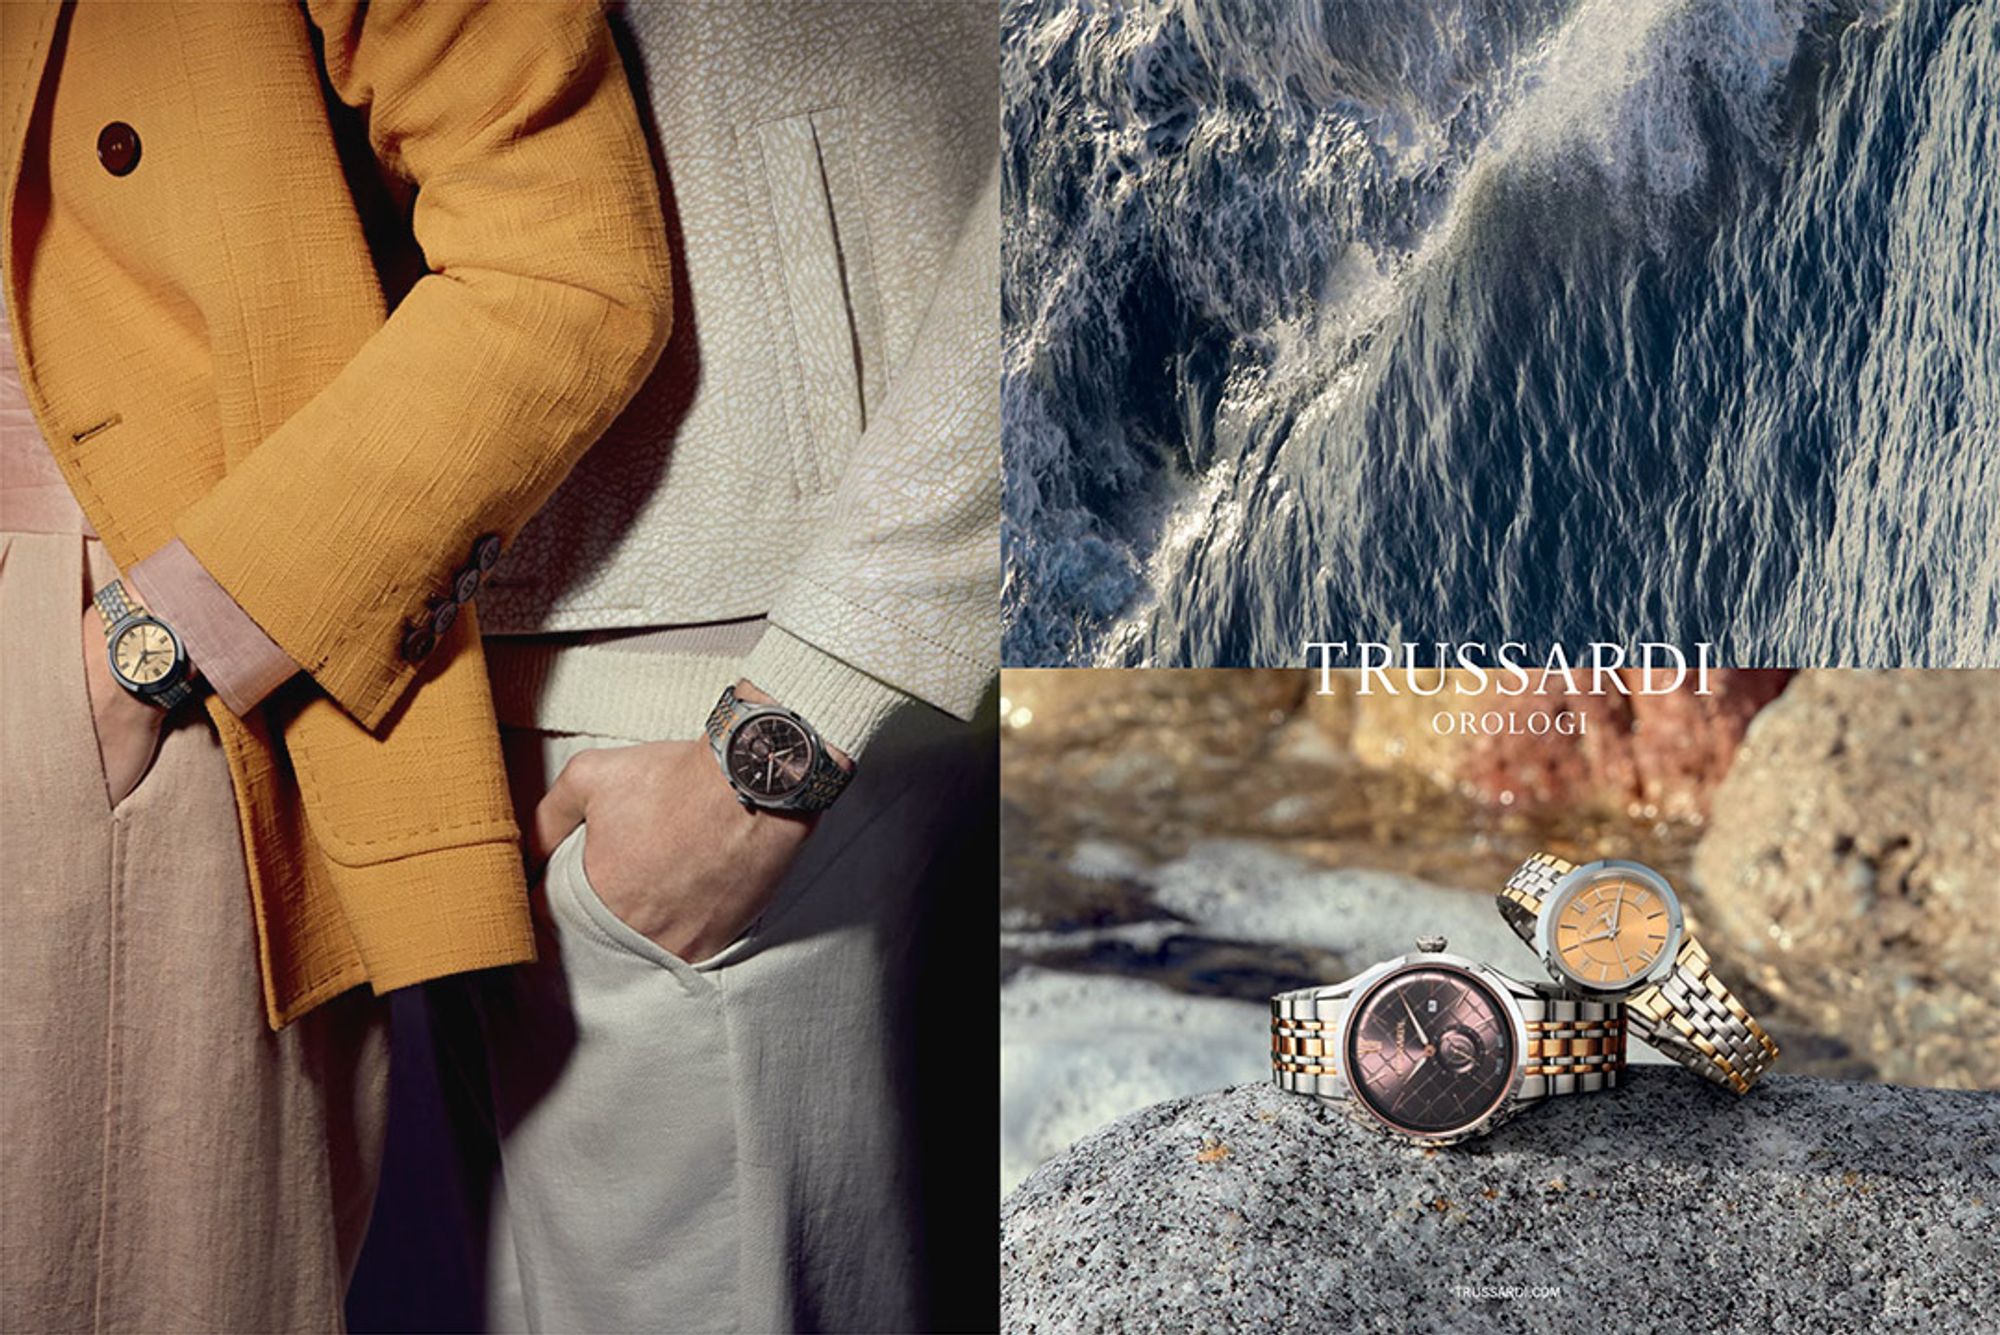 CREATIVE DIRECTION – ADVERTISING CAMPAIGN SS16 OROLOGI